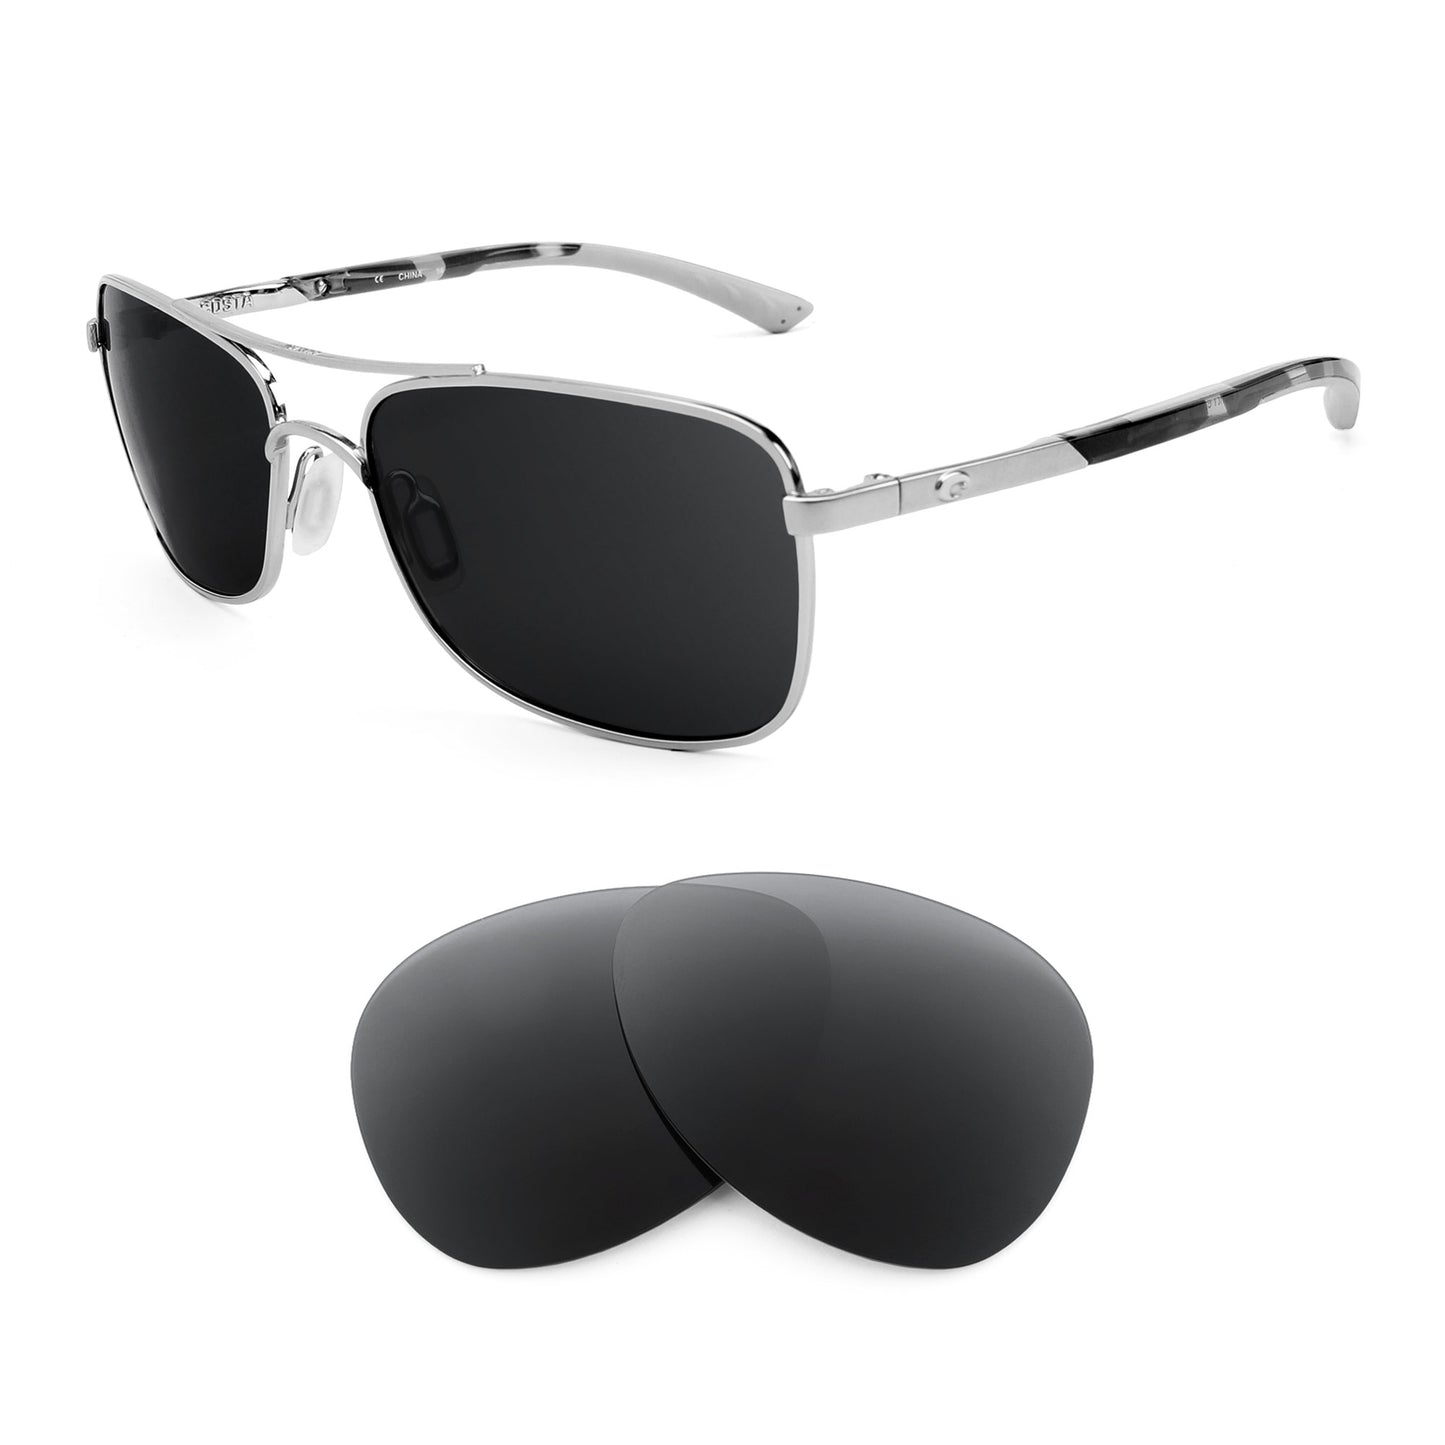 Costa Palapa sunglasses with replacement lenses